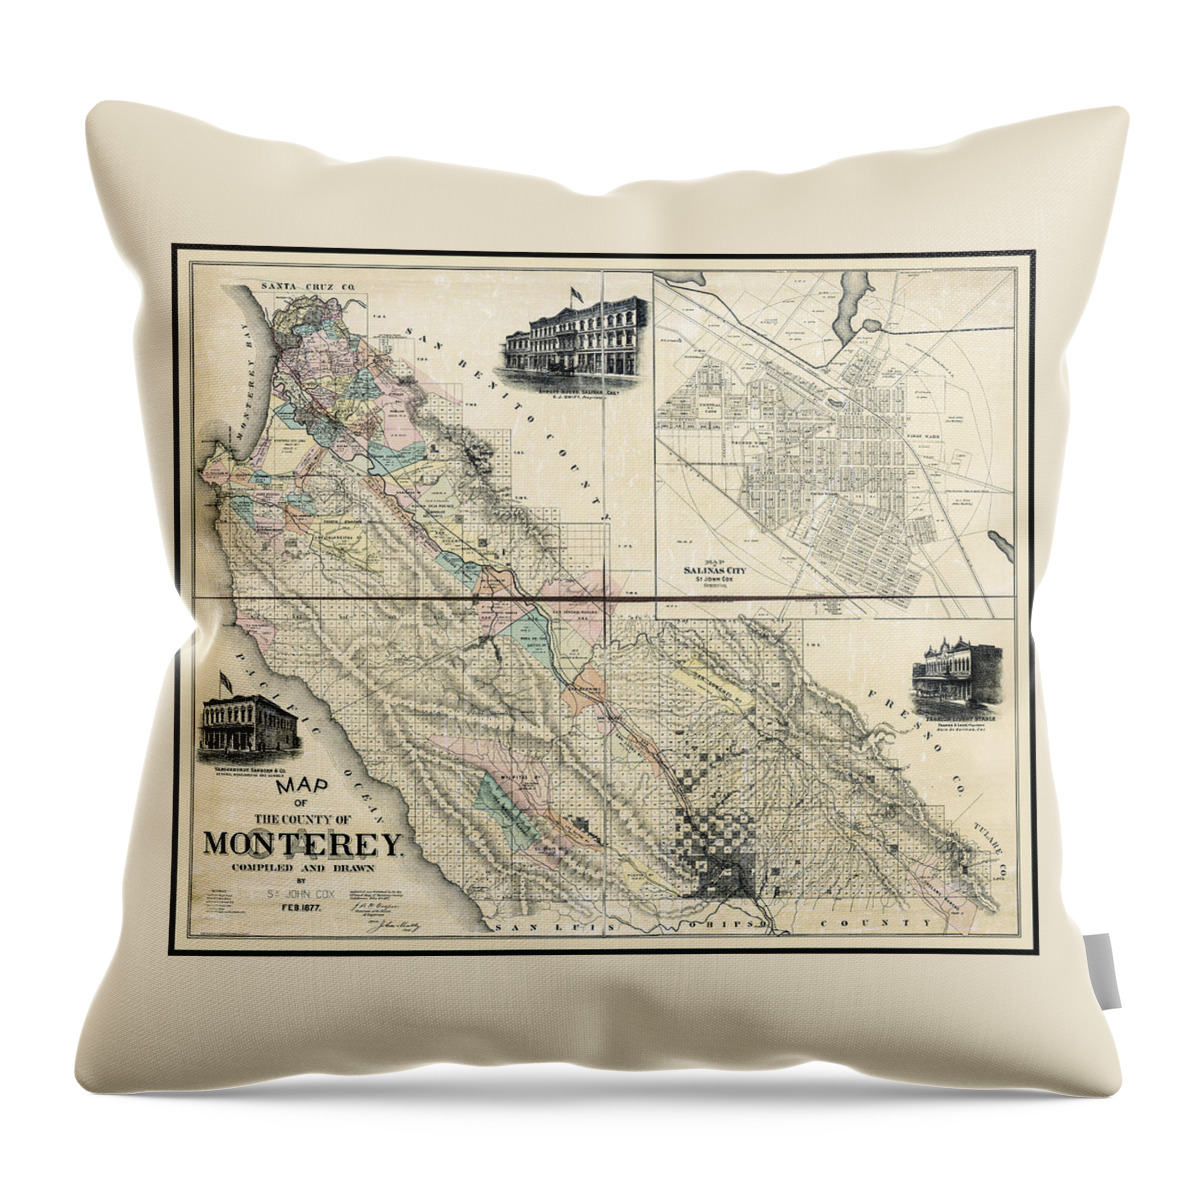 Monterey Throw Pillow featuring the photograph Monterey County California Vintage Map 1877 by Carol Japp